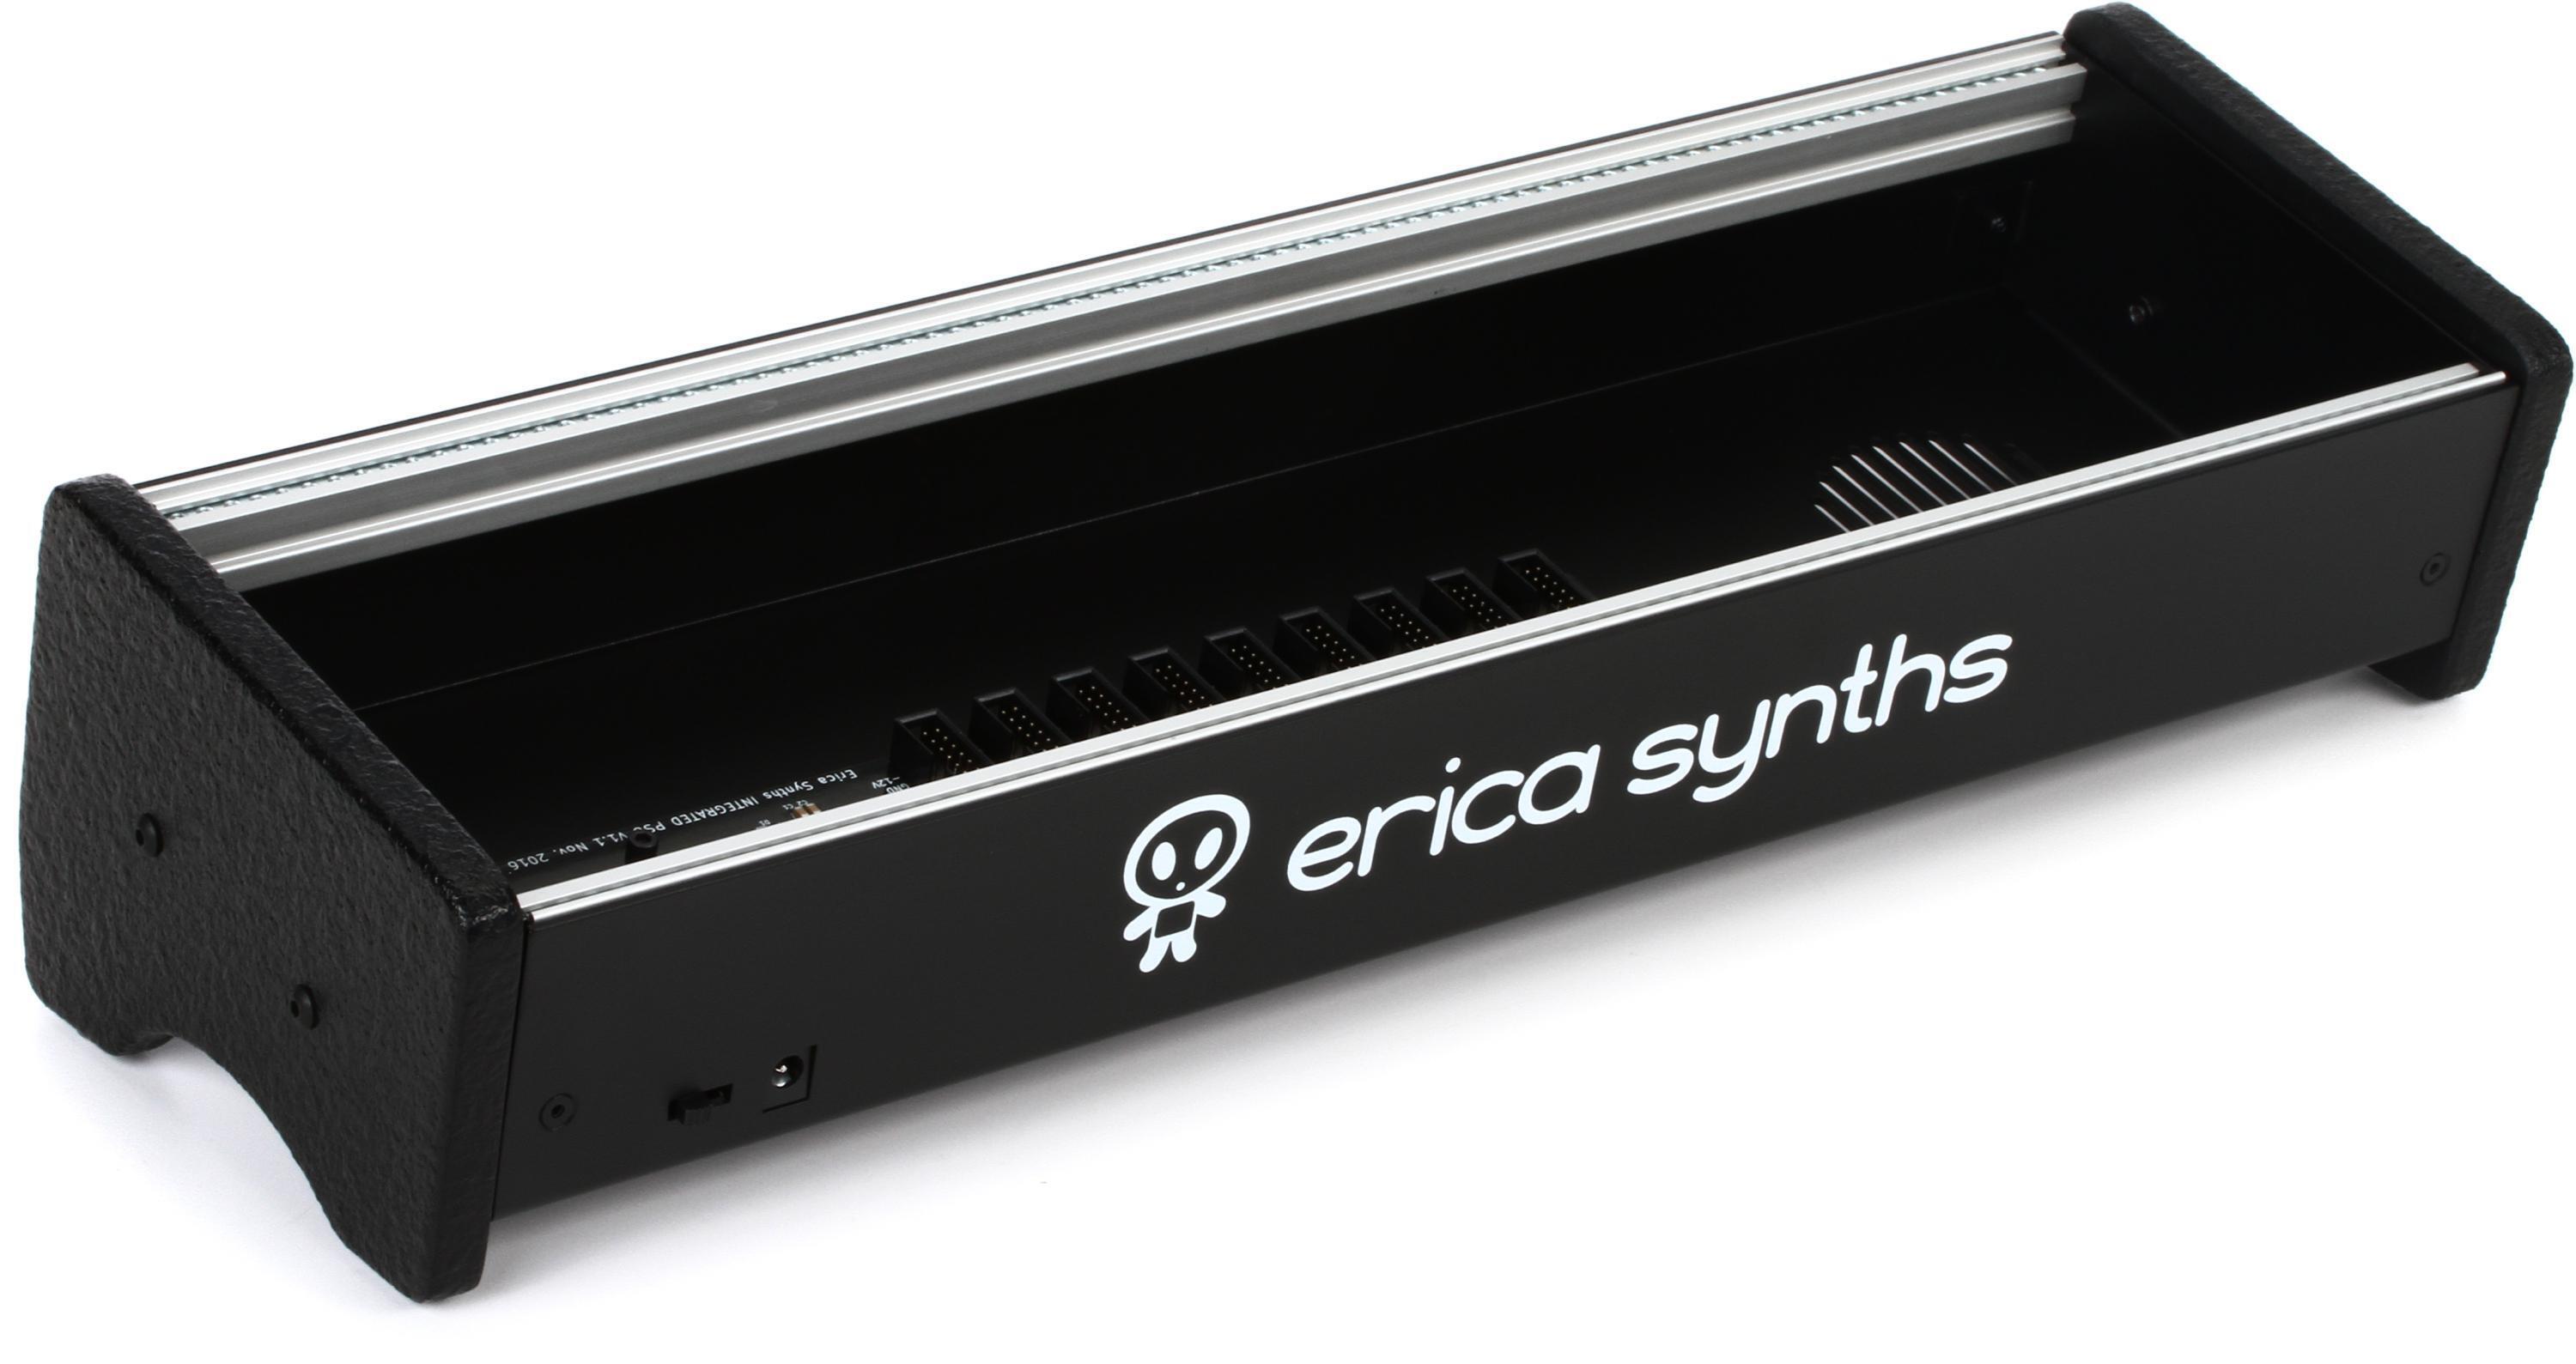 Erica Synths 1x84HP Skiff Case Eurorack Case with Power Supply - Black Side  Panels